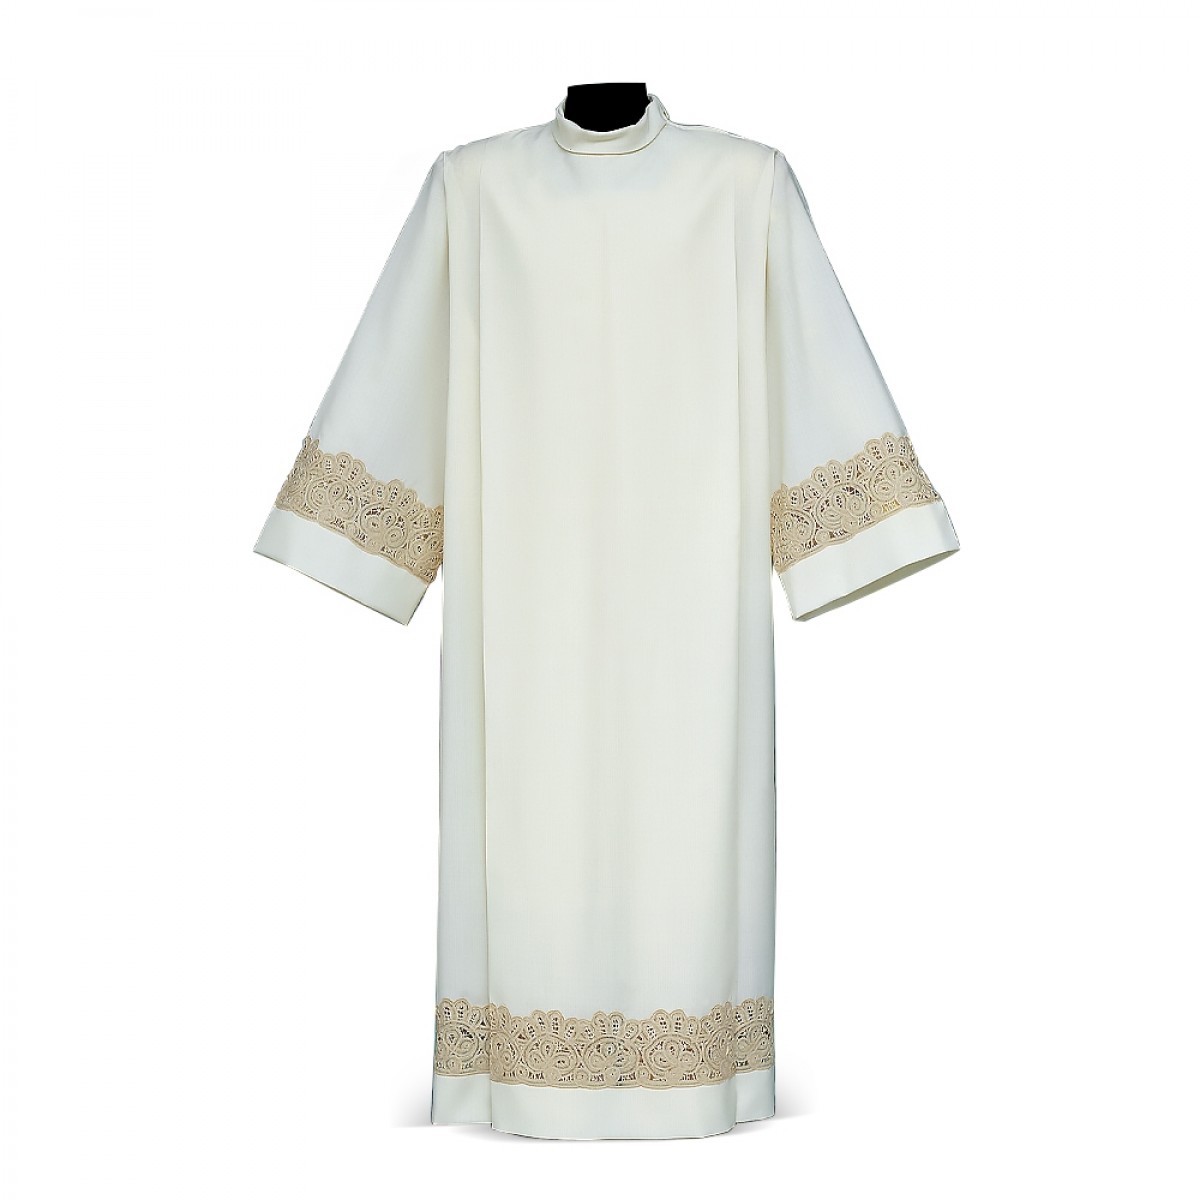 Ivory Roman Alb with Embroidery ENTREDEUR FIORI Design in Wool Blend #111 -  Albs - Liturgical Vestments - Vestments and Paraments